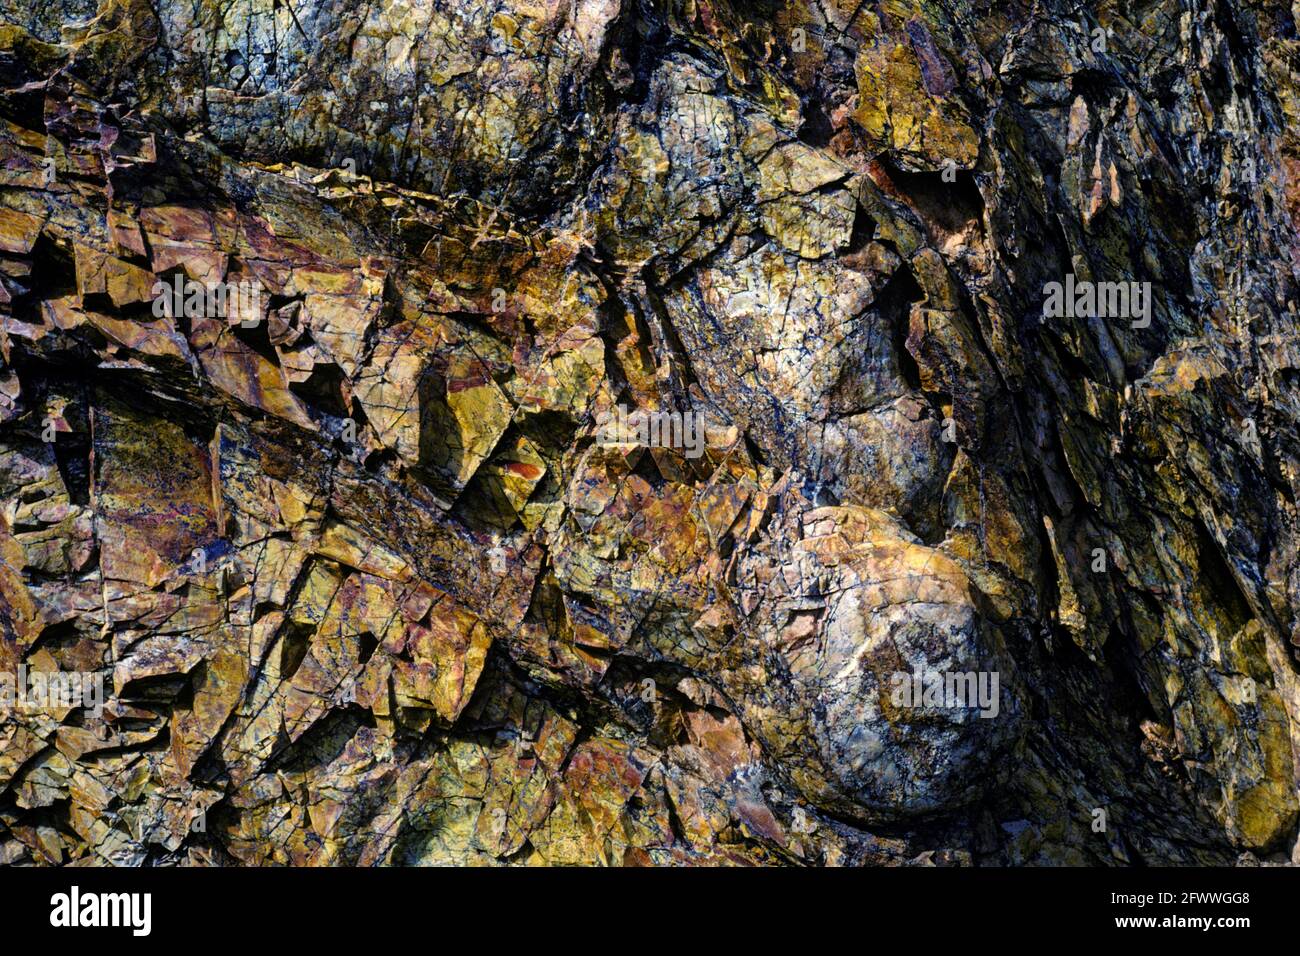 Hydrothermally altered shales have fractured and deformed in a colorful metasedimentary rock formation in California's Argus Range. Stock Photo